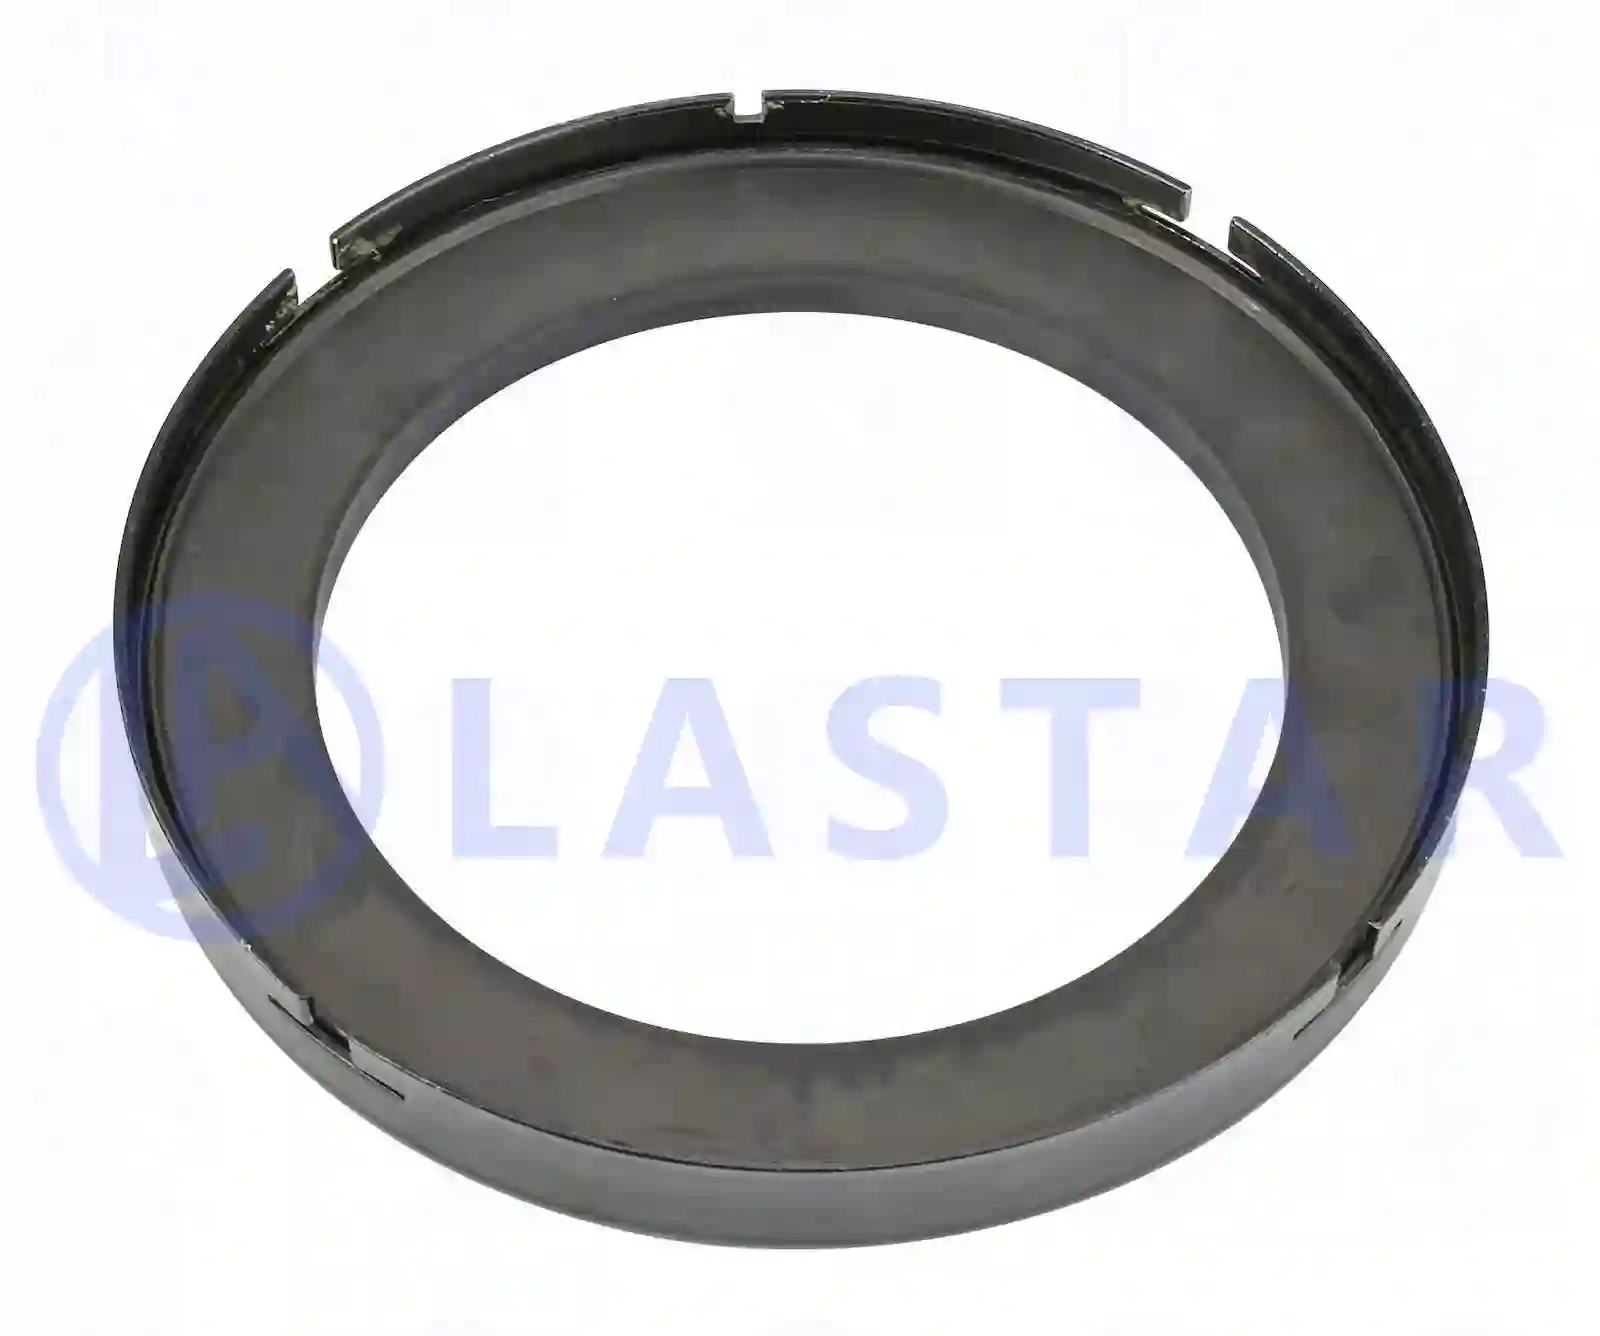 Seal ring, 77730237, 204728, , ||  77730237 Lastar Spare Part | Truck Spare Parts, Auotomotive Spare Parts Seal ring, 77730237, 204728, , ||  77730237 Lastar Spare Part | Truck Spare Parts, Auotomotive Spare Parts